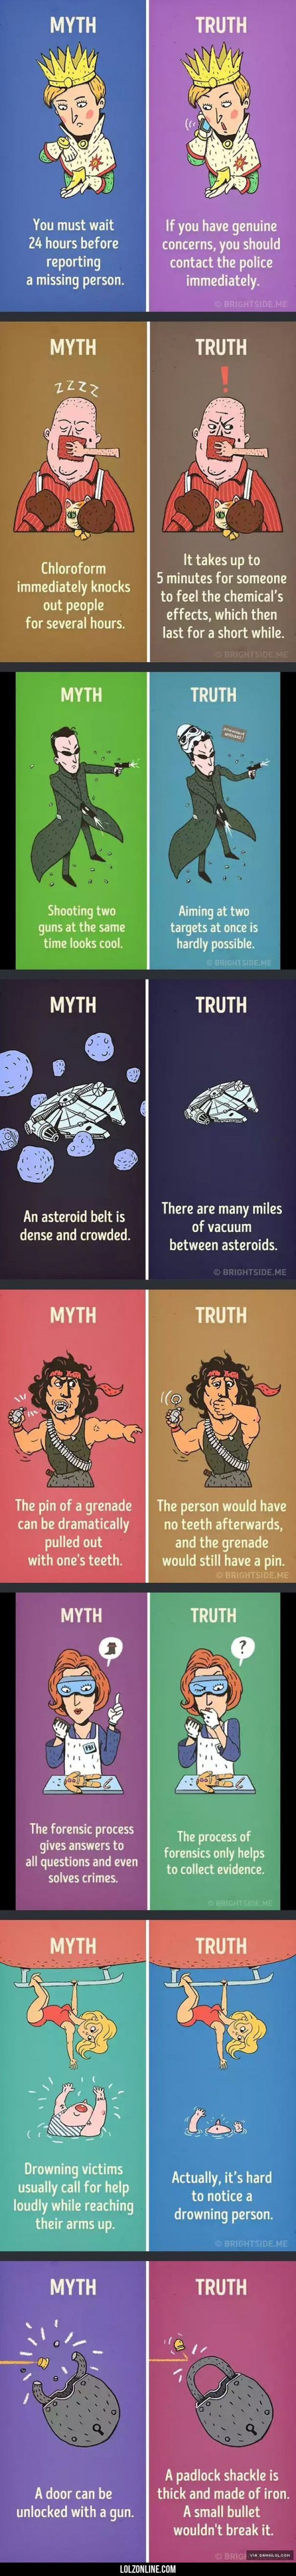 Myths You Believed Were True But Actually Werent